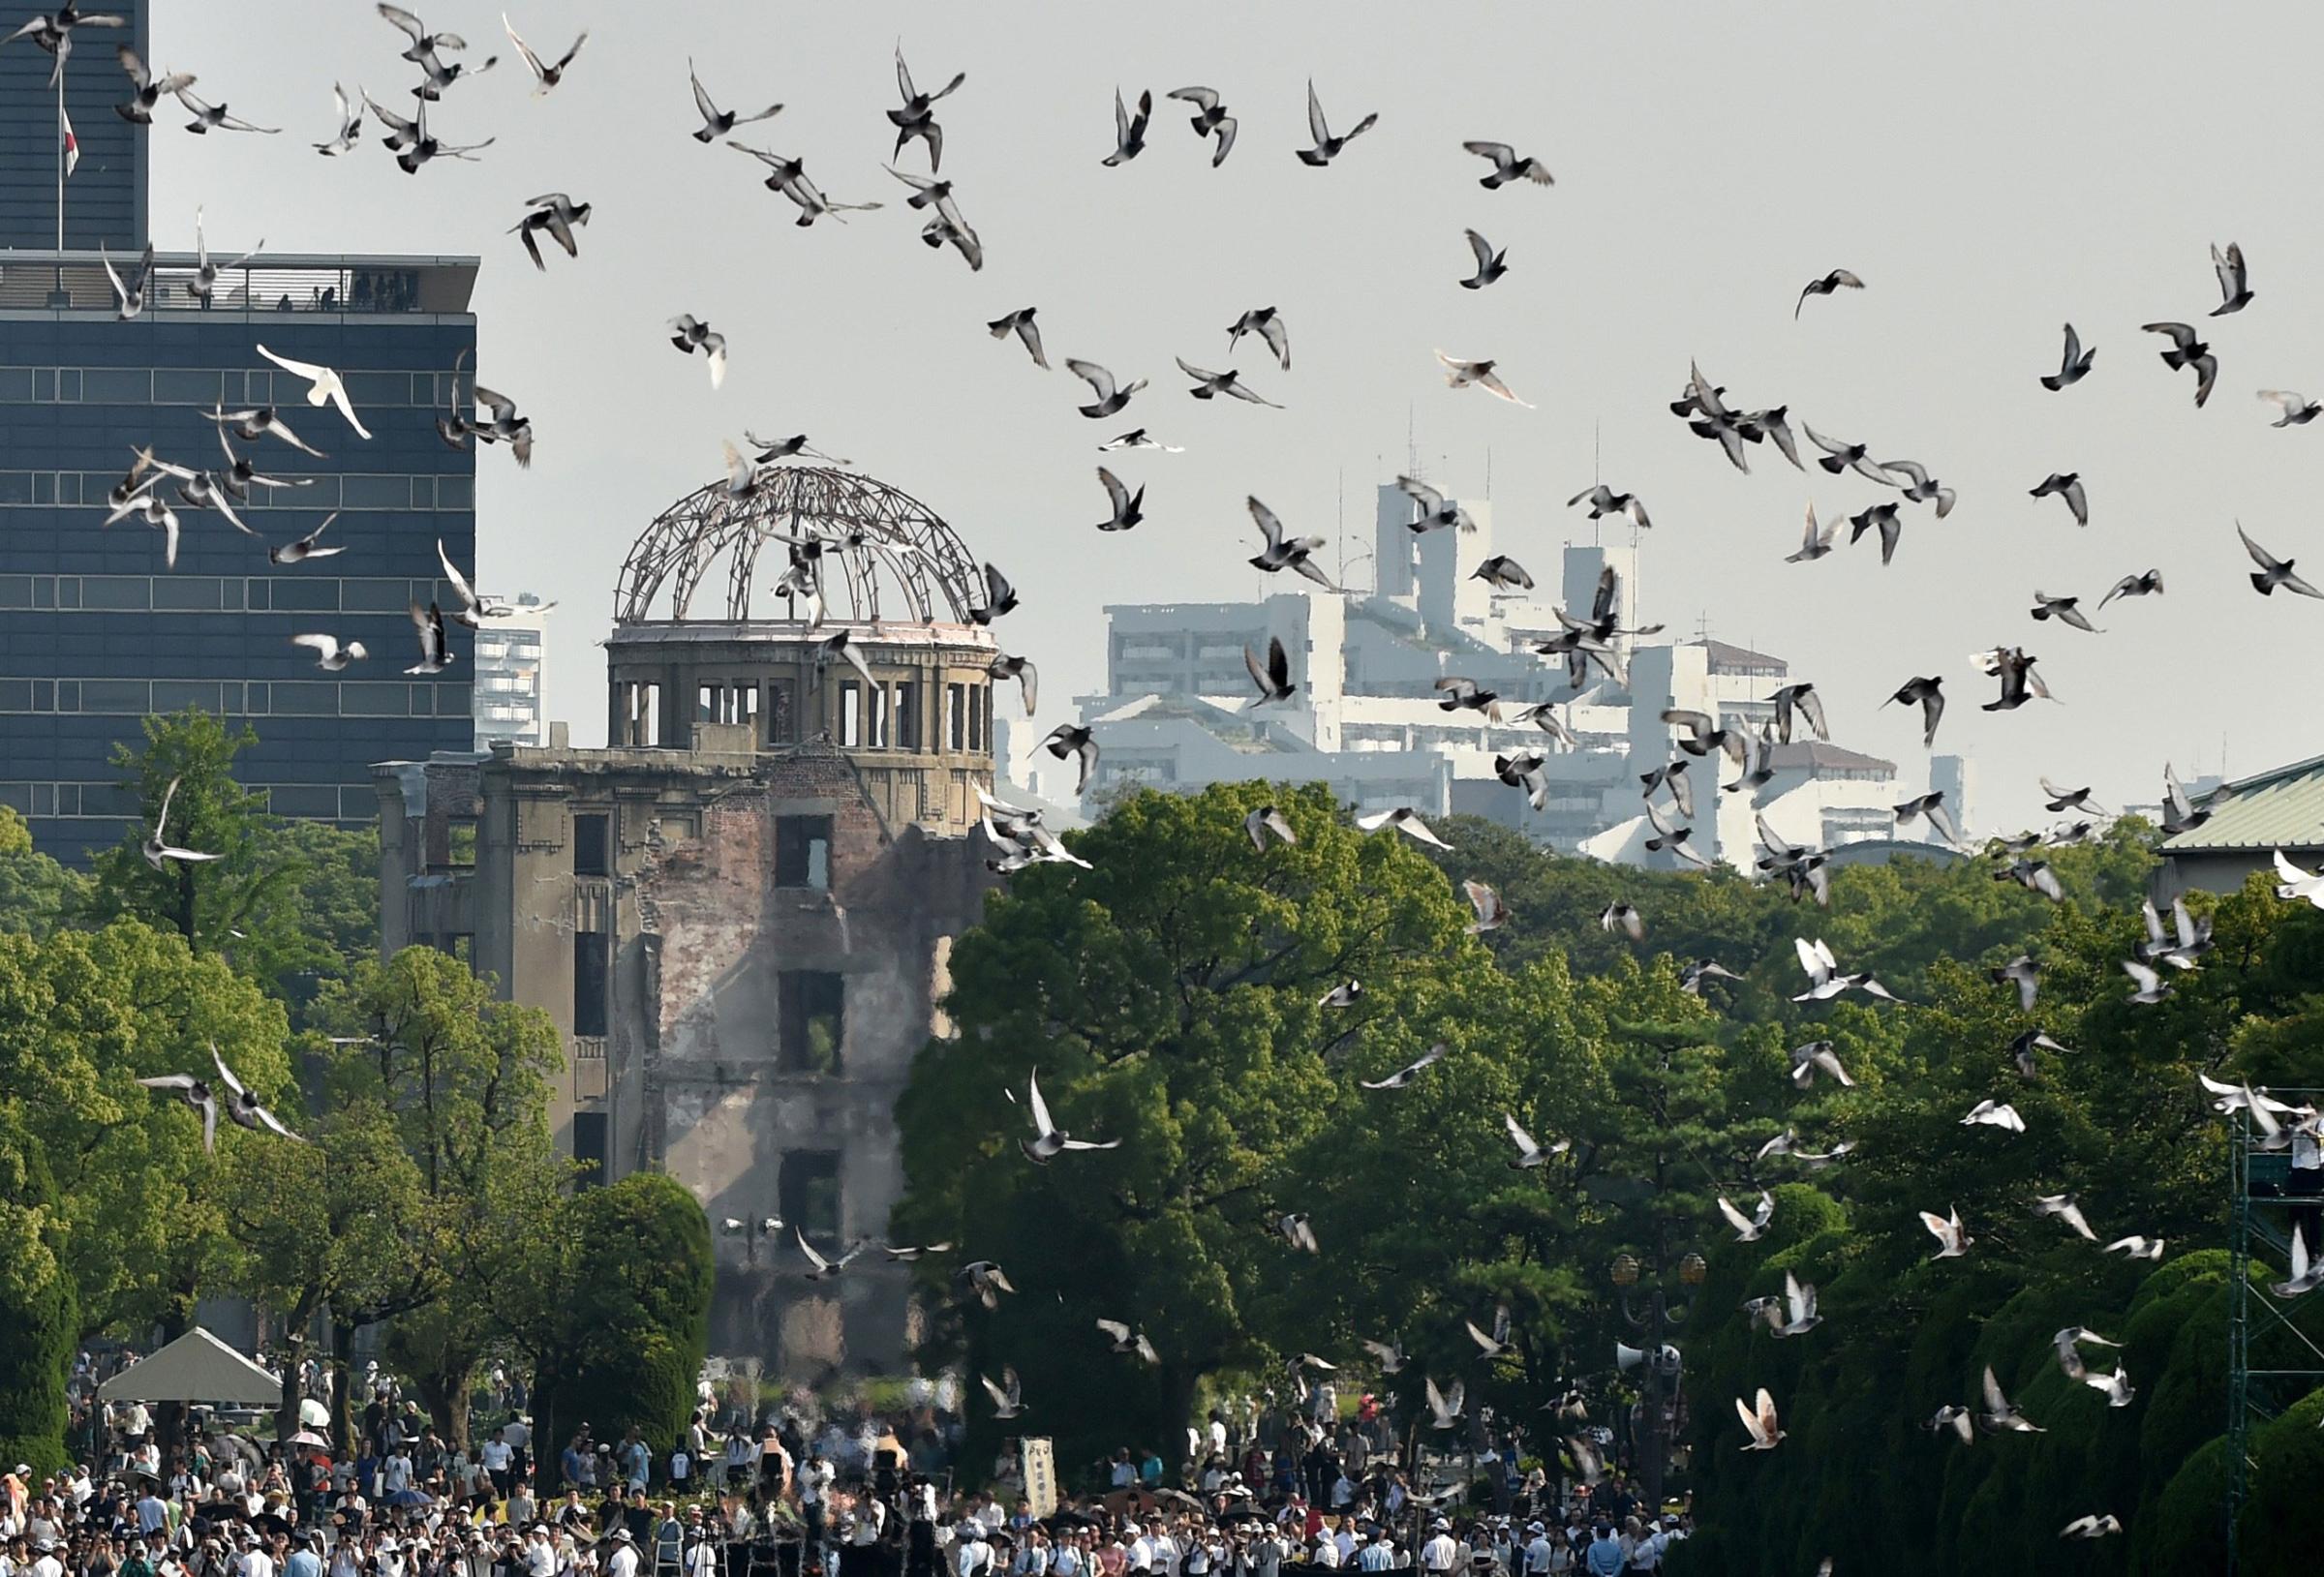 Doves fly over the Hiroshima Peace Memorial Park in western Japan on August 6, 2015 during a memorial ceremony to mark the 70th anniversary of the atomic bombing of Hiroshima.